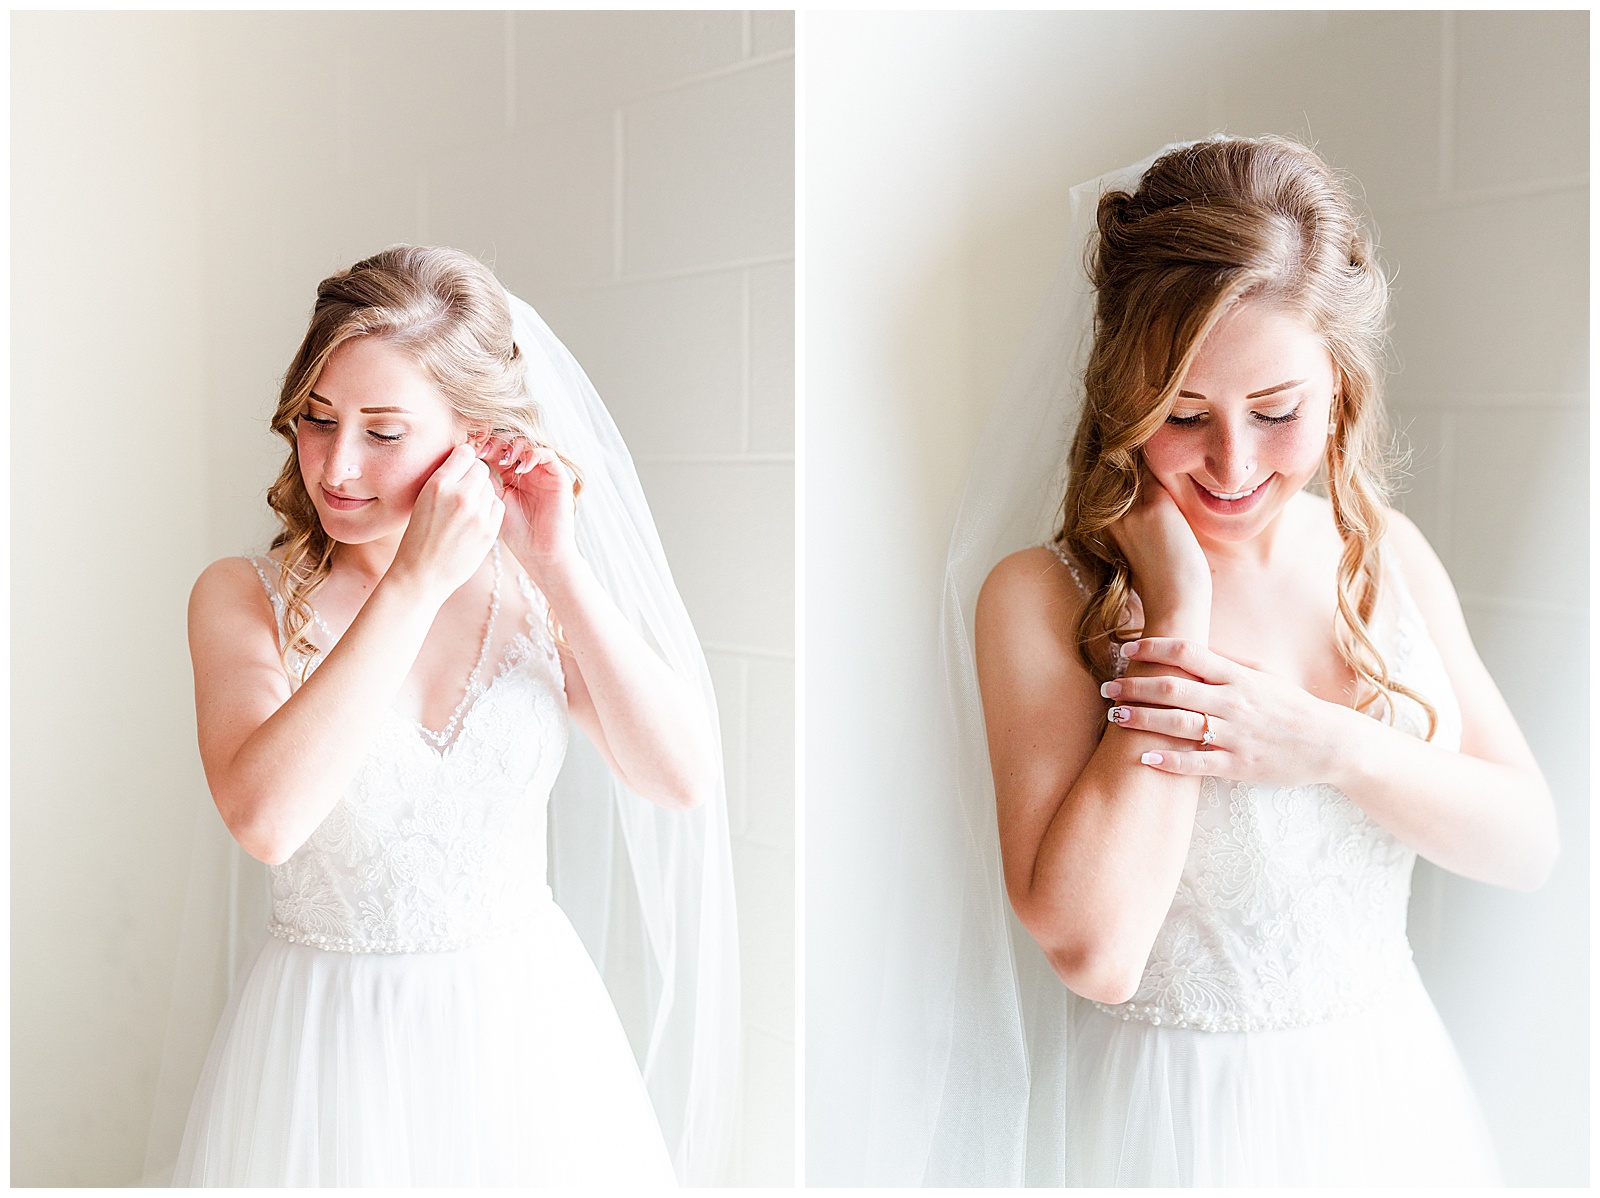 Simple V-Neck Lace wedding dress from Summer Wedding in Charlotte, NC | check out the full wedding at KevynDixonPhoto.com